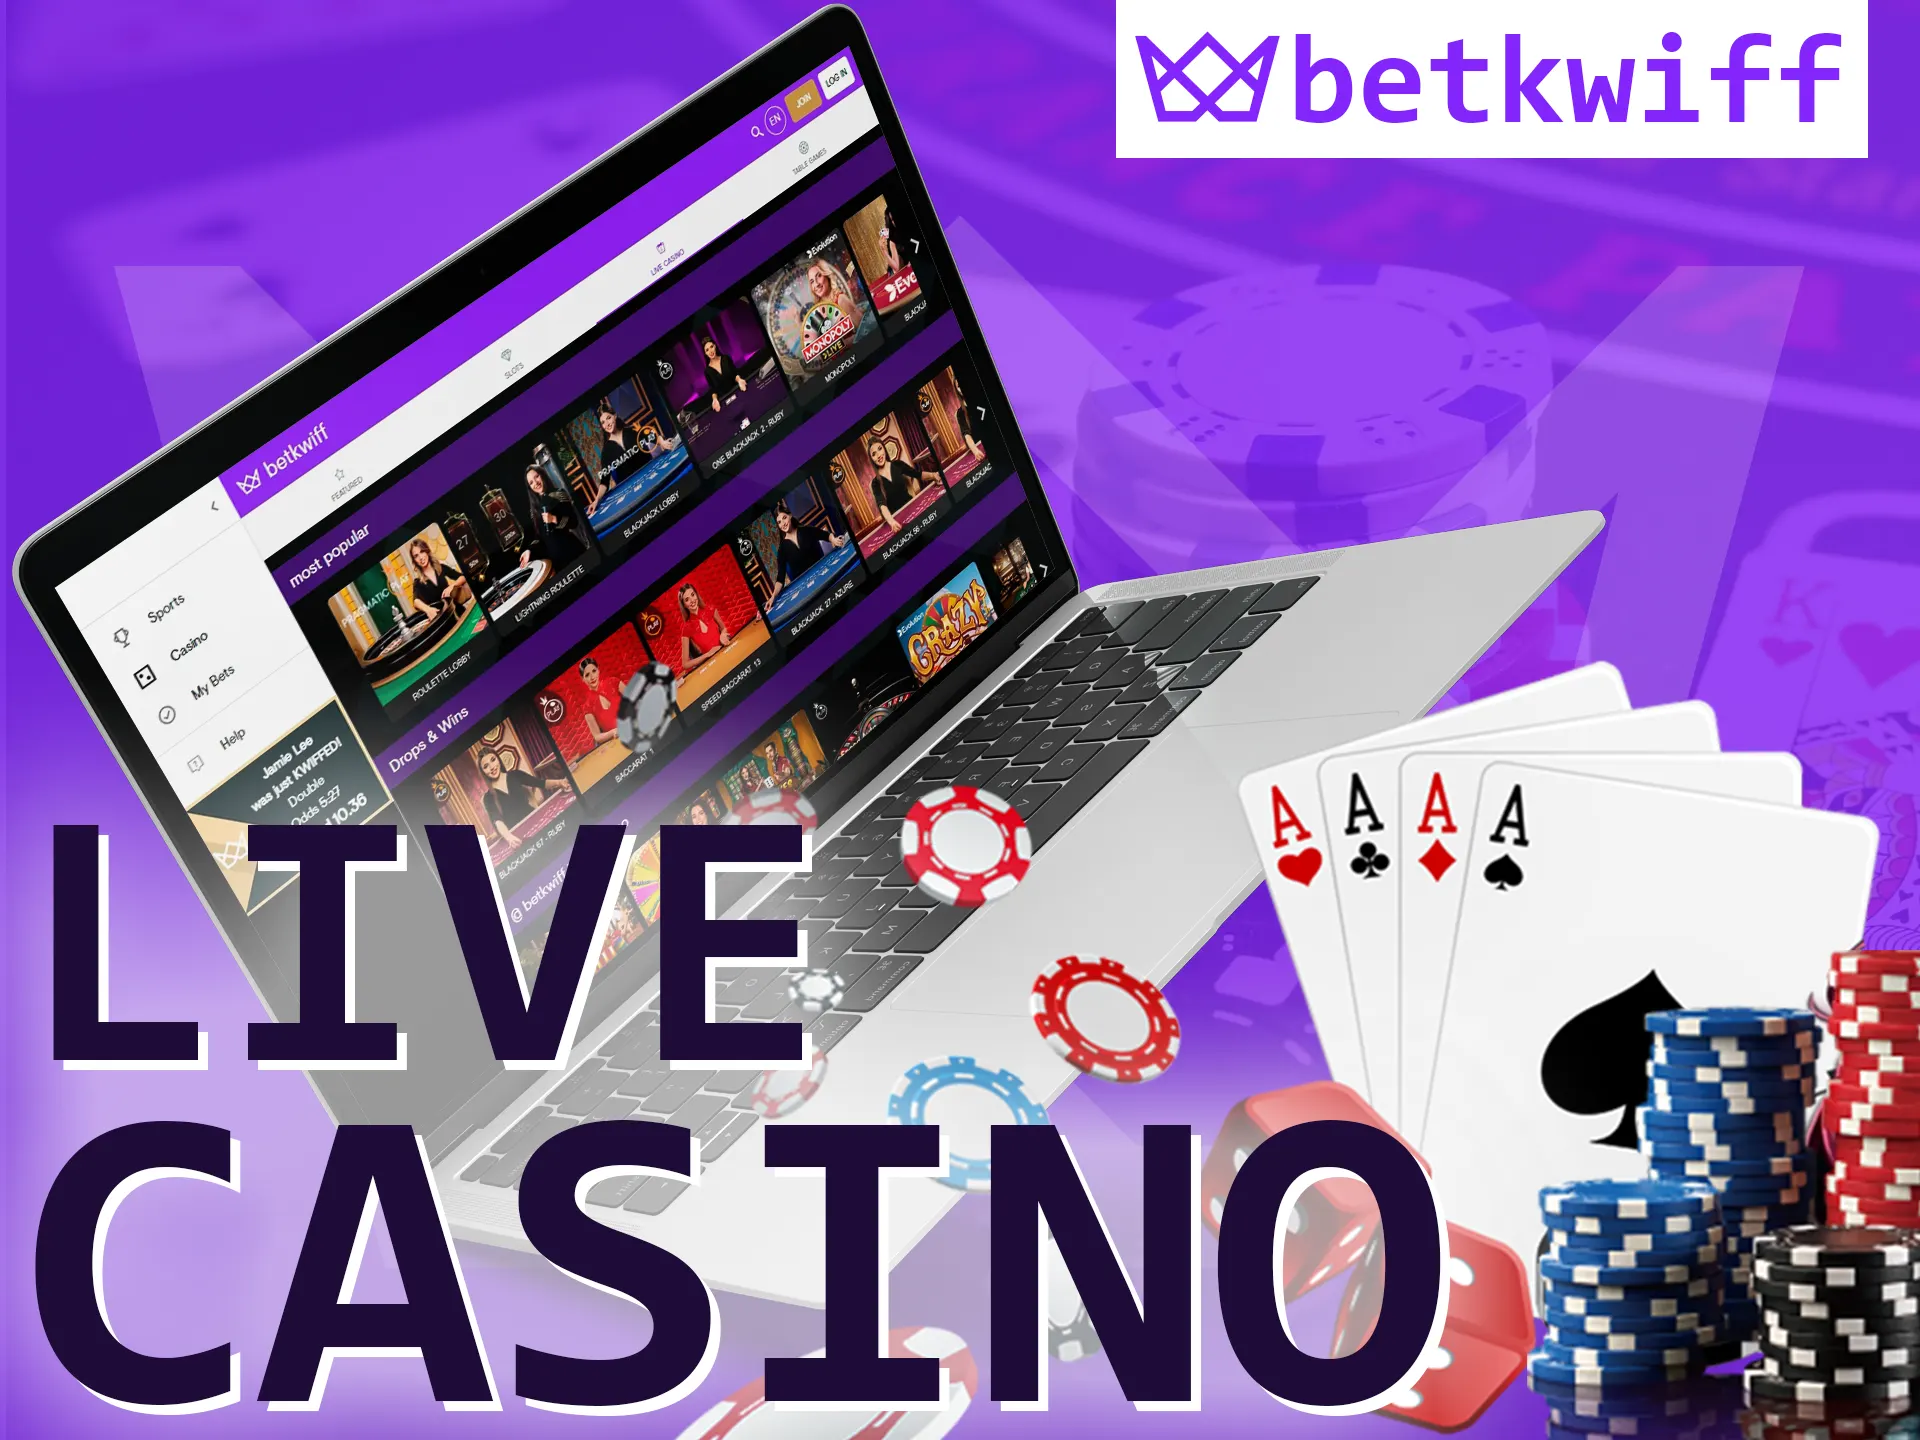 Play live casino with Betkwiff.